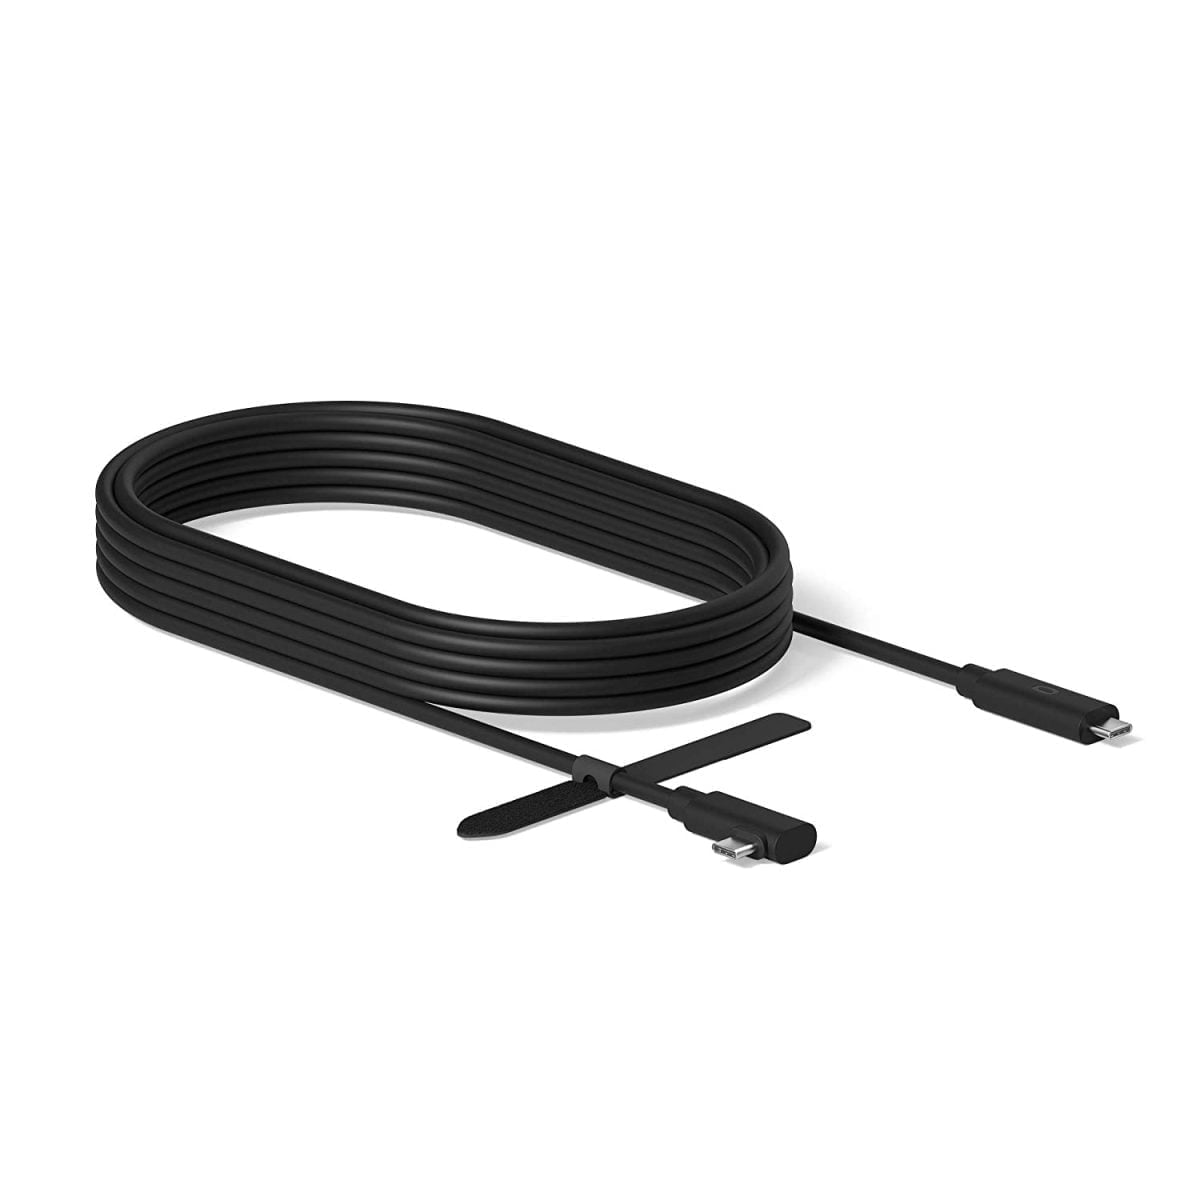 Oculus &Lt;H1&Gt;Oculus Link Virtual Reality Headset Cable For Quest 2 And Quest - 16Ft (5M) - Pc Vr&Lt;/H1&Gt; &Lt;H4 Class=&Quot;A-Size-Base-Plus A-Text-Bold&Quot;&Gt;About This Item&Lt;/H4&Gt; &Lt;Ul Class=&Quot;A-Unordered-List A-Vertical A-Spacing-Mini&Quot;&Gt; &Lt;Li&Gt;&Lt;Span Class=&Quot;A-List-Item&Quot;&Gt;This Premium Fiber-Optic Cable Delivers Exceptional Performance For Pc Vr Gaming On Your Quest And Quest 2 While Simultaneously Powering The Headset&Lt;/Span&Gt;&Lt;/Li&Gt; &Lt;Li&Gt;&Lt;Span Class=&Quot;A-List-Item&Quot;&Gt;Oculus Link Connects Oculus Quest And Quest 2 To A Gaming Pc, Giving You Access To A Wide Range Of Oculus Rift Apps And Games&Lt;/Span&Gt;&Lt;/Li&Gt; &Lt;Li&Gt;&Lt;Span Class=&Quot;A-List-Item&Quot;&Gt;Optimal Length Reaches 16 Feet (5M), Providing A Best-In-Class Experience With Flexible, Lightweight Durability&Lt;/Span&Gt;&Lt;/Li&Gt; &Lt;Li&Gt;&Lt;Span Class=&Quot;A-List-Item&Quot;&Gt;High-Quality Spiral Shielding Doubles As Grounding And Ensures A Consistent And Robust Connection&Lt;/Span&Gt;&Lt;/Li&Gt; &Lt;Li&Gt;&Lt;Span Class=&Quot;A-List-Item&Quot;&Gt;Made For Oculus Quest And Quest 2 Vr Headsets&Lt;/Span&Gt;&Lt;/Li&Gt; &Lt;Li&Gt;&Lt;Span Class=&Quot;A-List-Item&Quot;&Gt;Compatible Gaming Pc Required, Not Included. See Oculus Website For Pc Compatibility Specifications.&Lt;/Span&Gt;&Lt;/Li&Gt; &Lt;Li&Gt;&Lt;Span Class=&Quot;A-List-Item&Quot;&Gt;Facebook Account Required&Lt;/Span&Gt;&Lt;/Li&Gt; &Lt;Li&Gt;&Lt;Span Class=&Quot;A-List-Item&Quot;&Gt;Requires Wireless Internet Access And The Oculus App (Free Download) For Setup&Lt;/Span&Gt;&Lt;/Li&Gt; &Lt;/Ul&Gt; Oculus Link Virtual Reality Headset Cable Oculus Link Virtual Reality Headset Cable For Quest 2 And Quest - 16Ft (5M) - Pc Vr